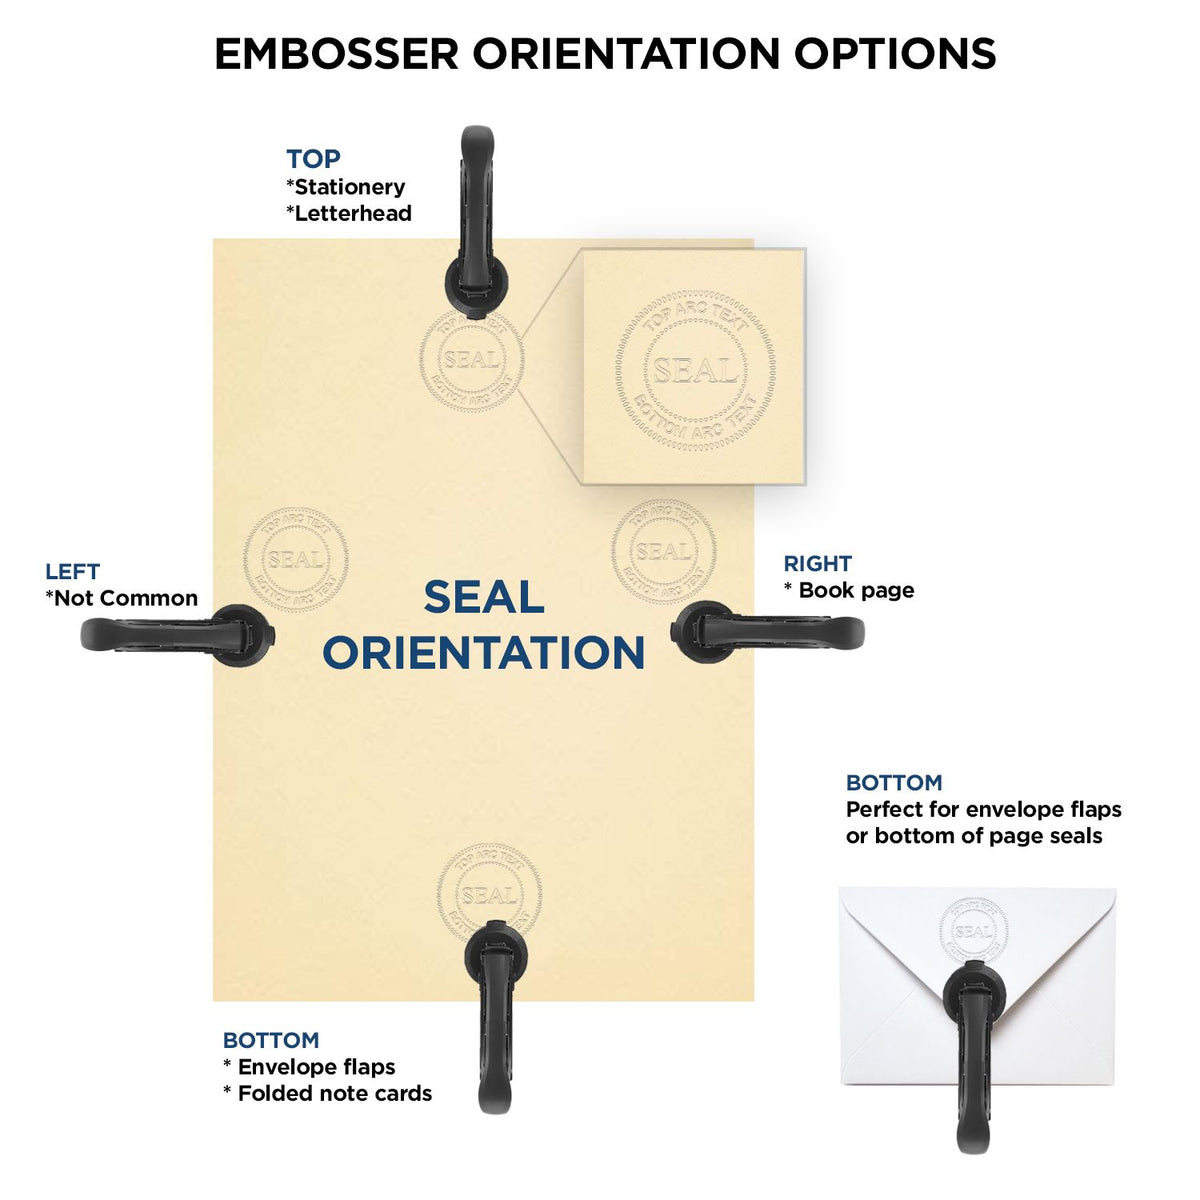 An infographic for the Long Reach New Mexico PE Seal showing embosser orientation, this is showing examples of a top, bottom, right and left insert.